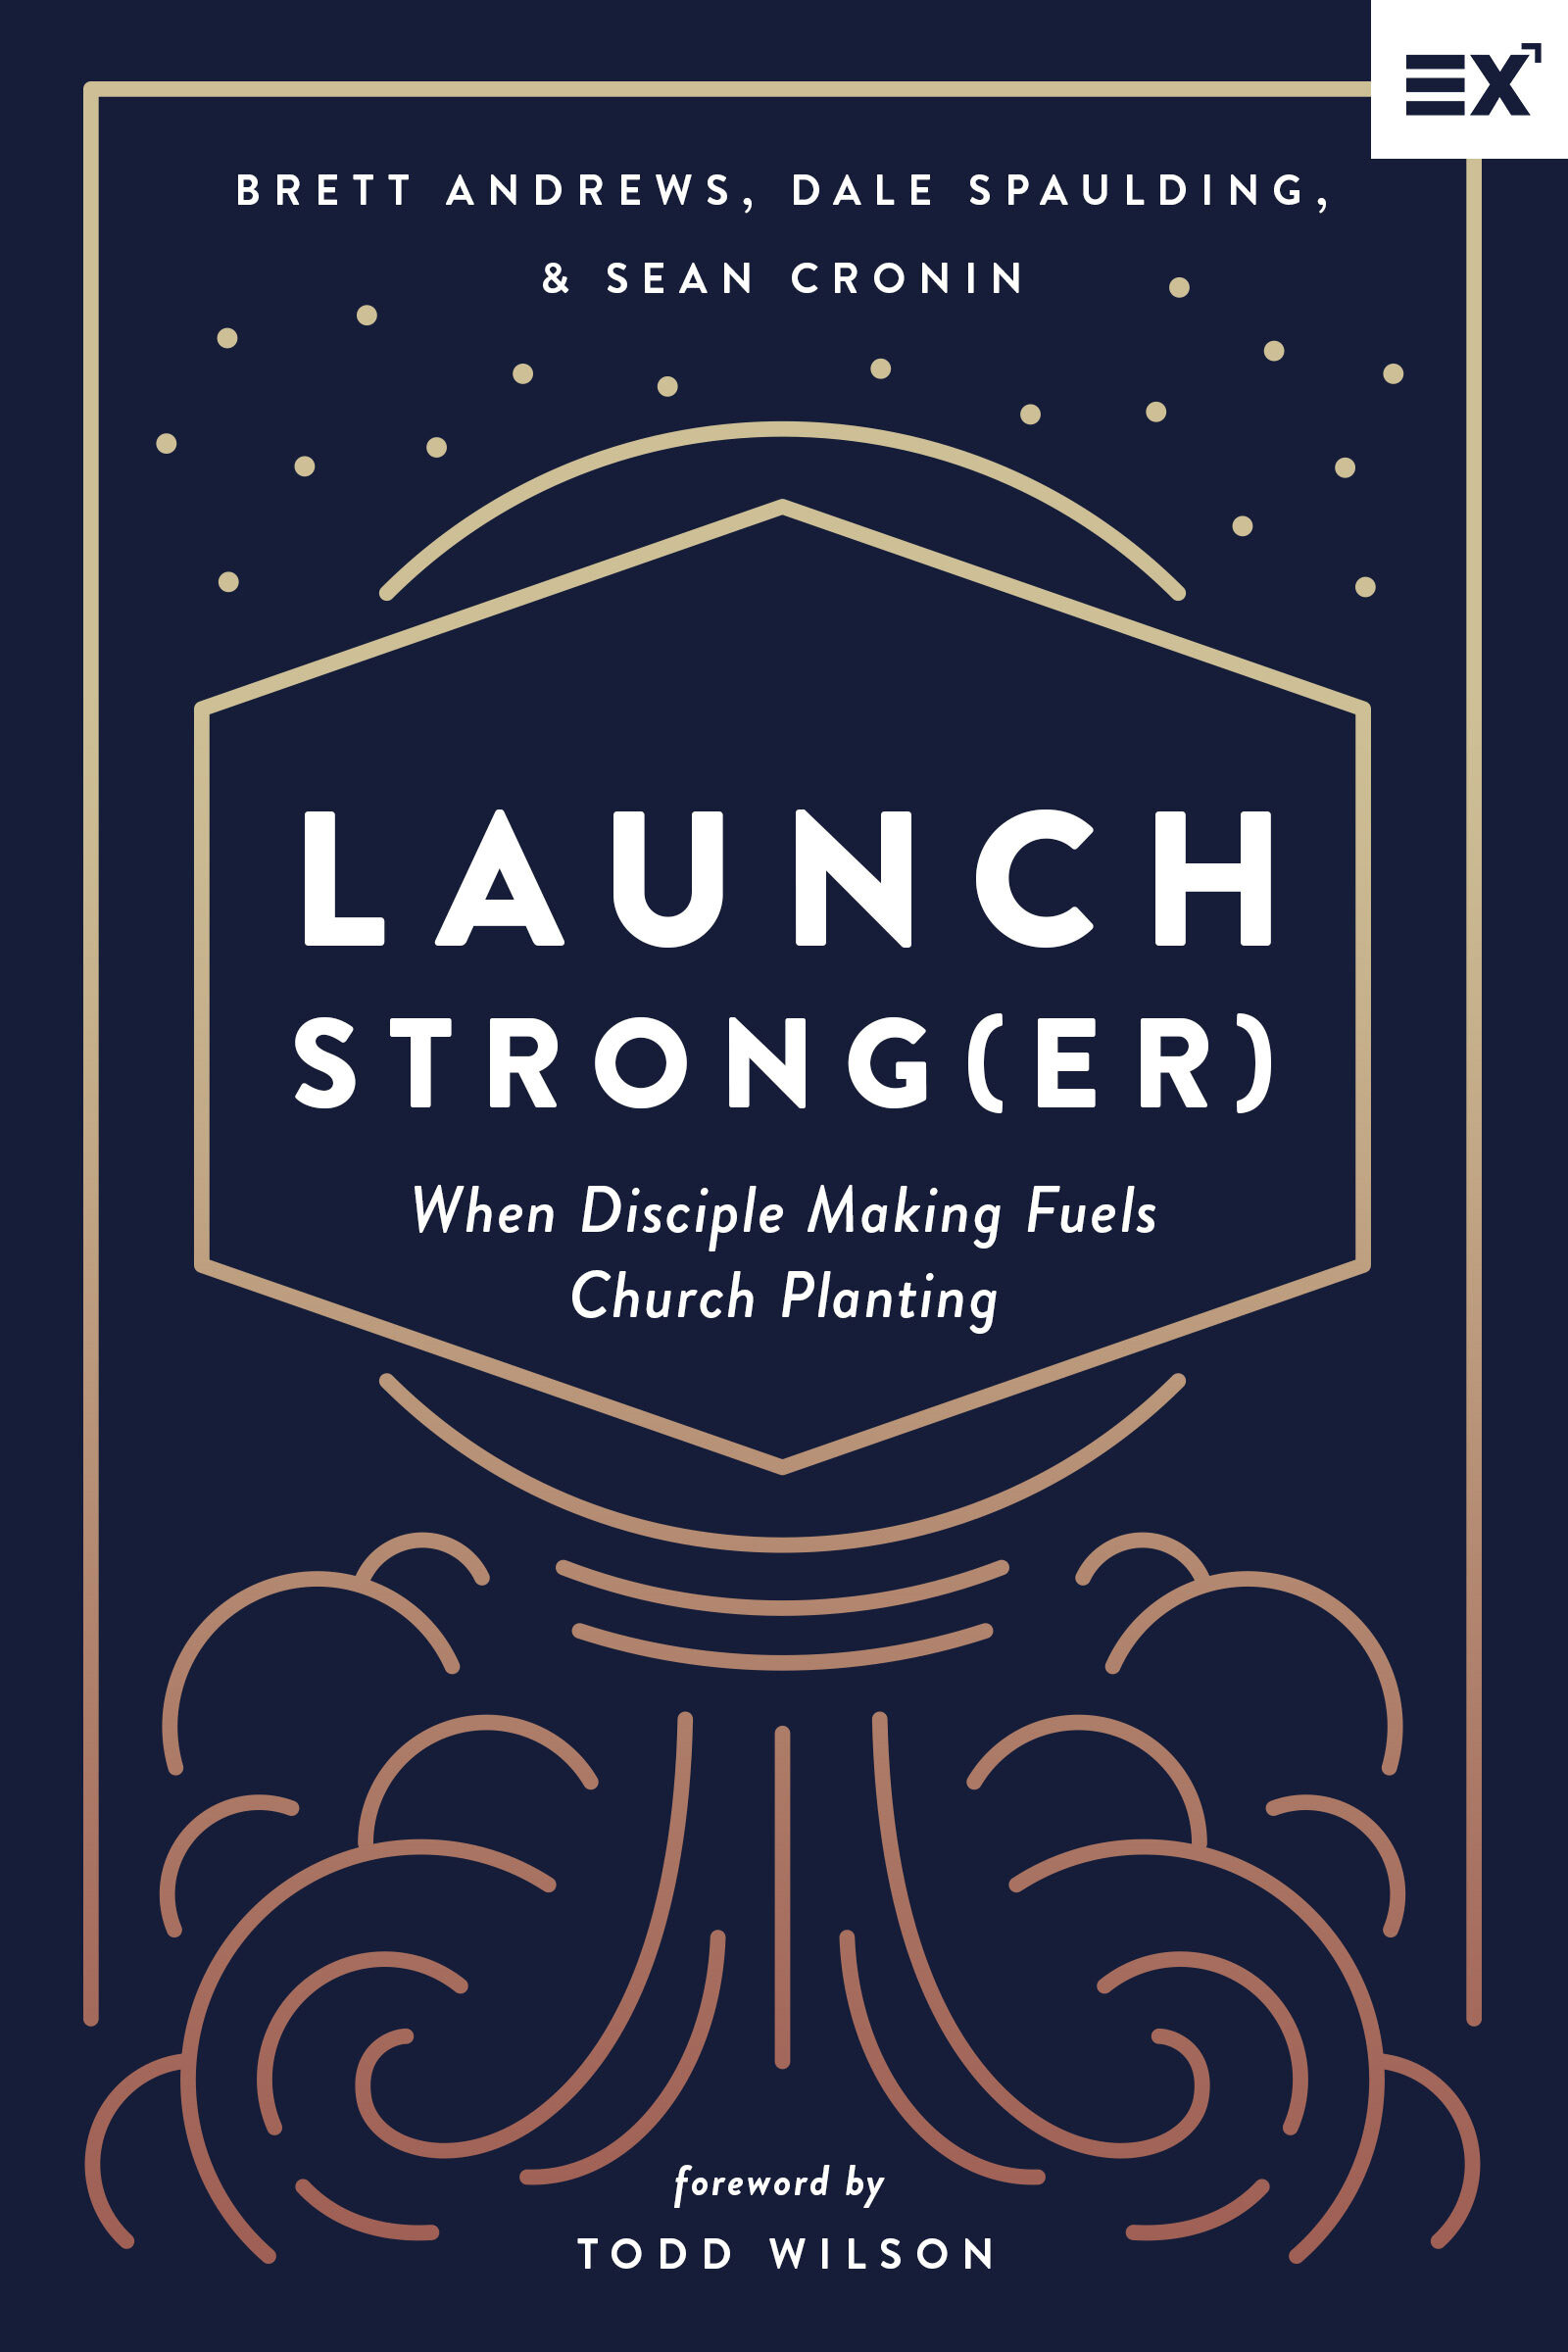 Launch Strong(er): When Disciple Making Fuels Church Planting